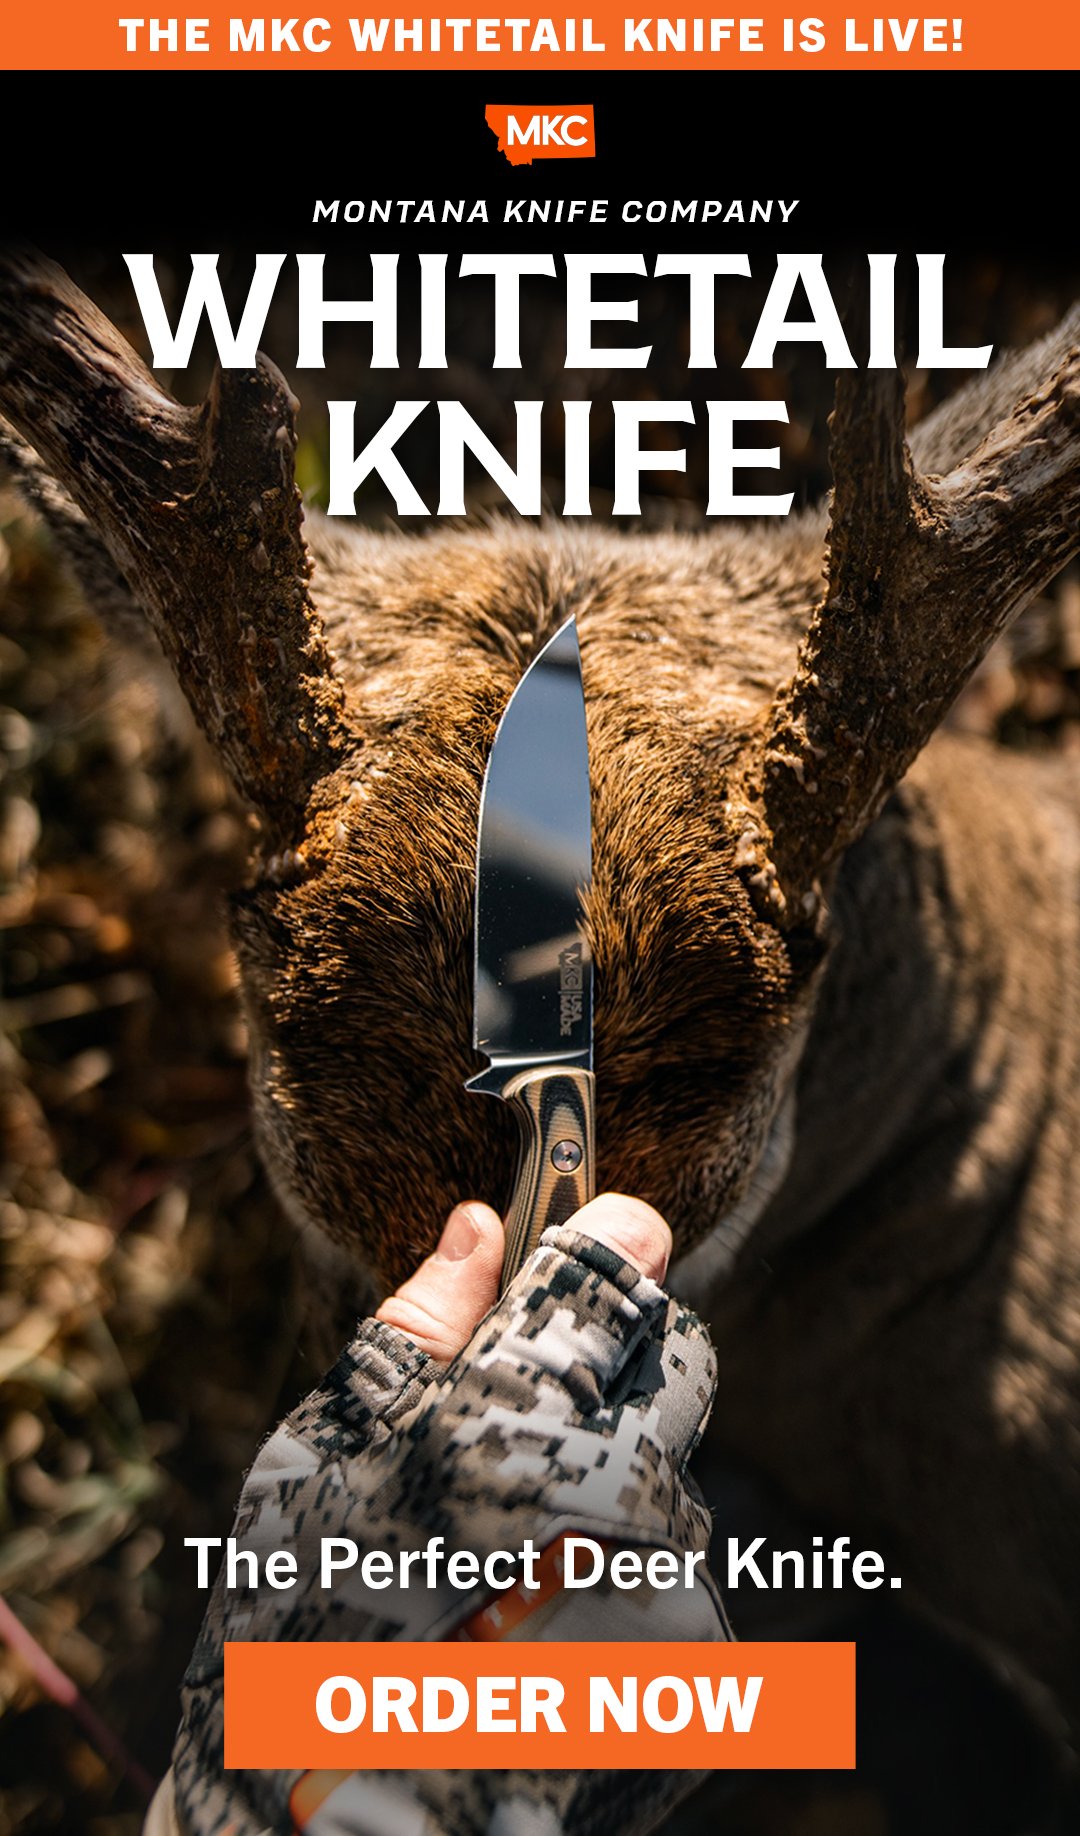 Montana Knife Company: 🚨 The MKC Whitetail Knife is LIVE!! | Milled